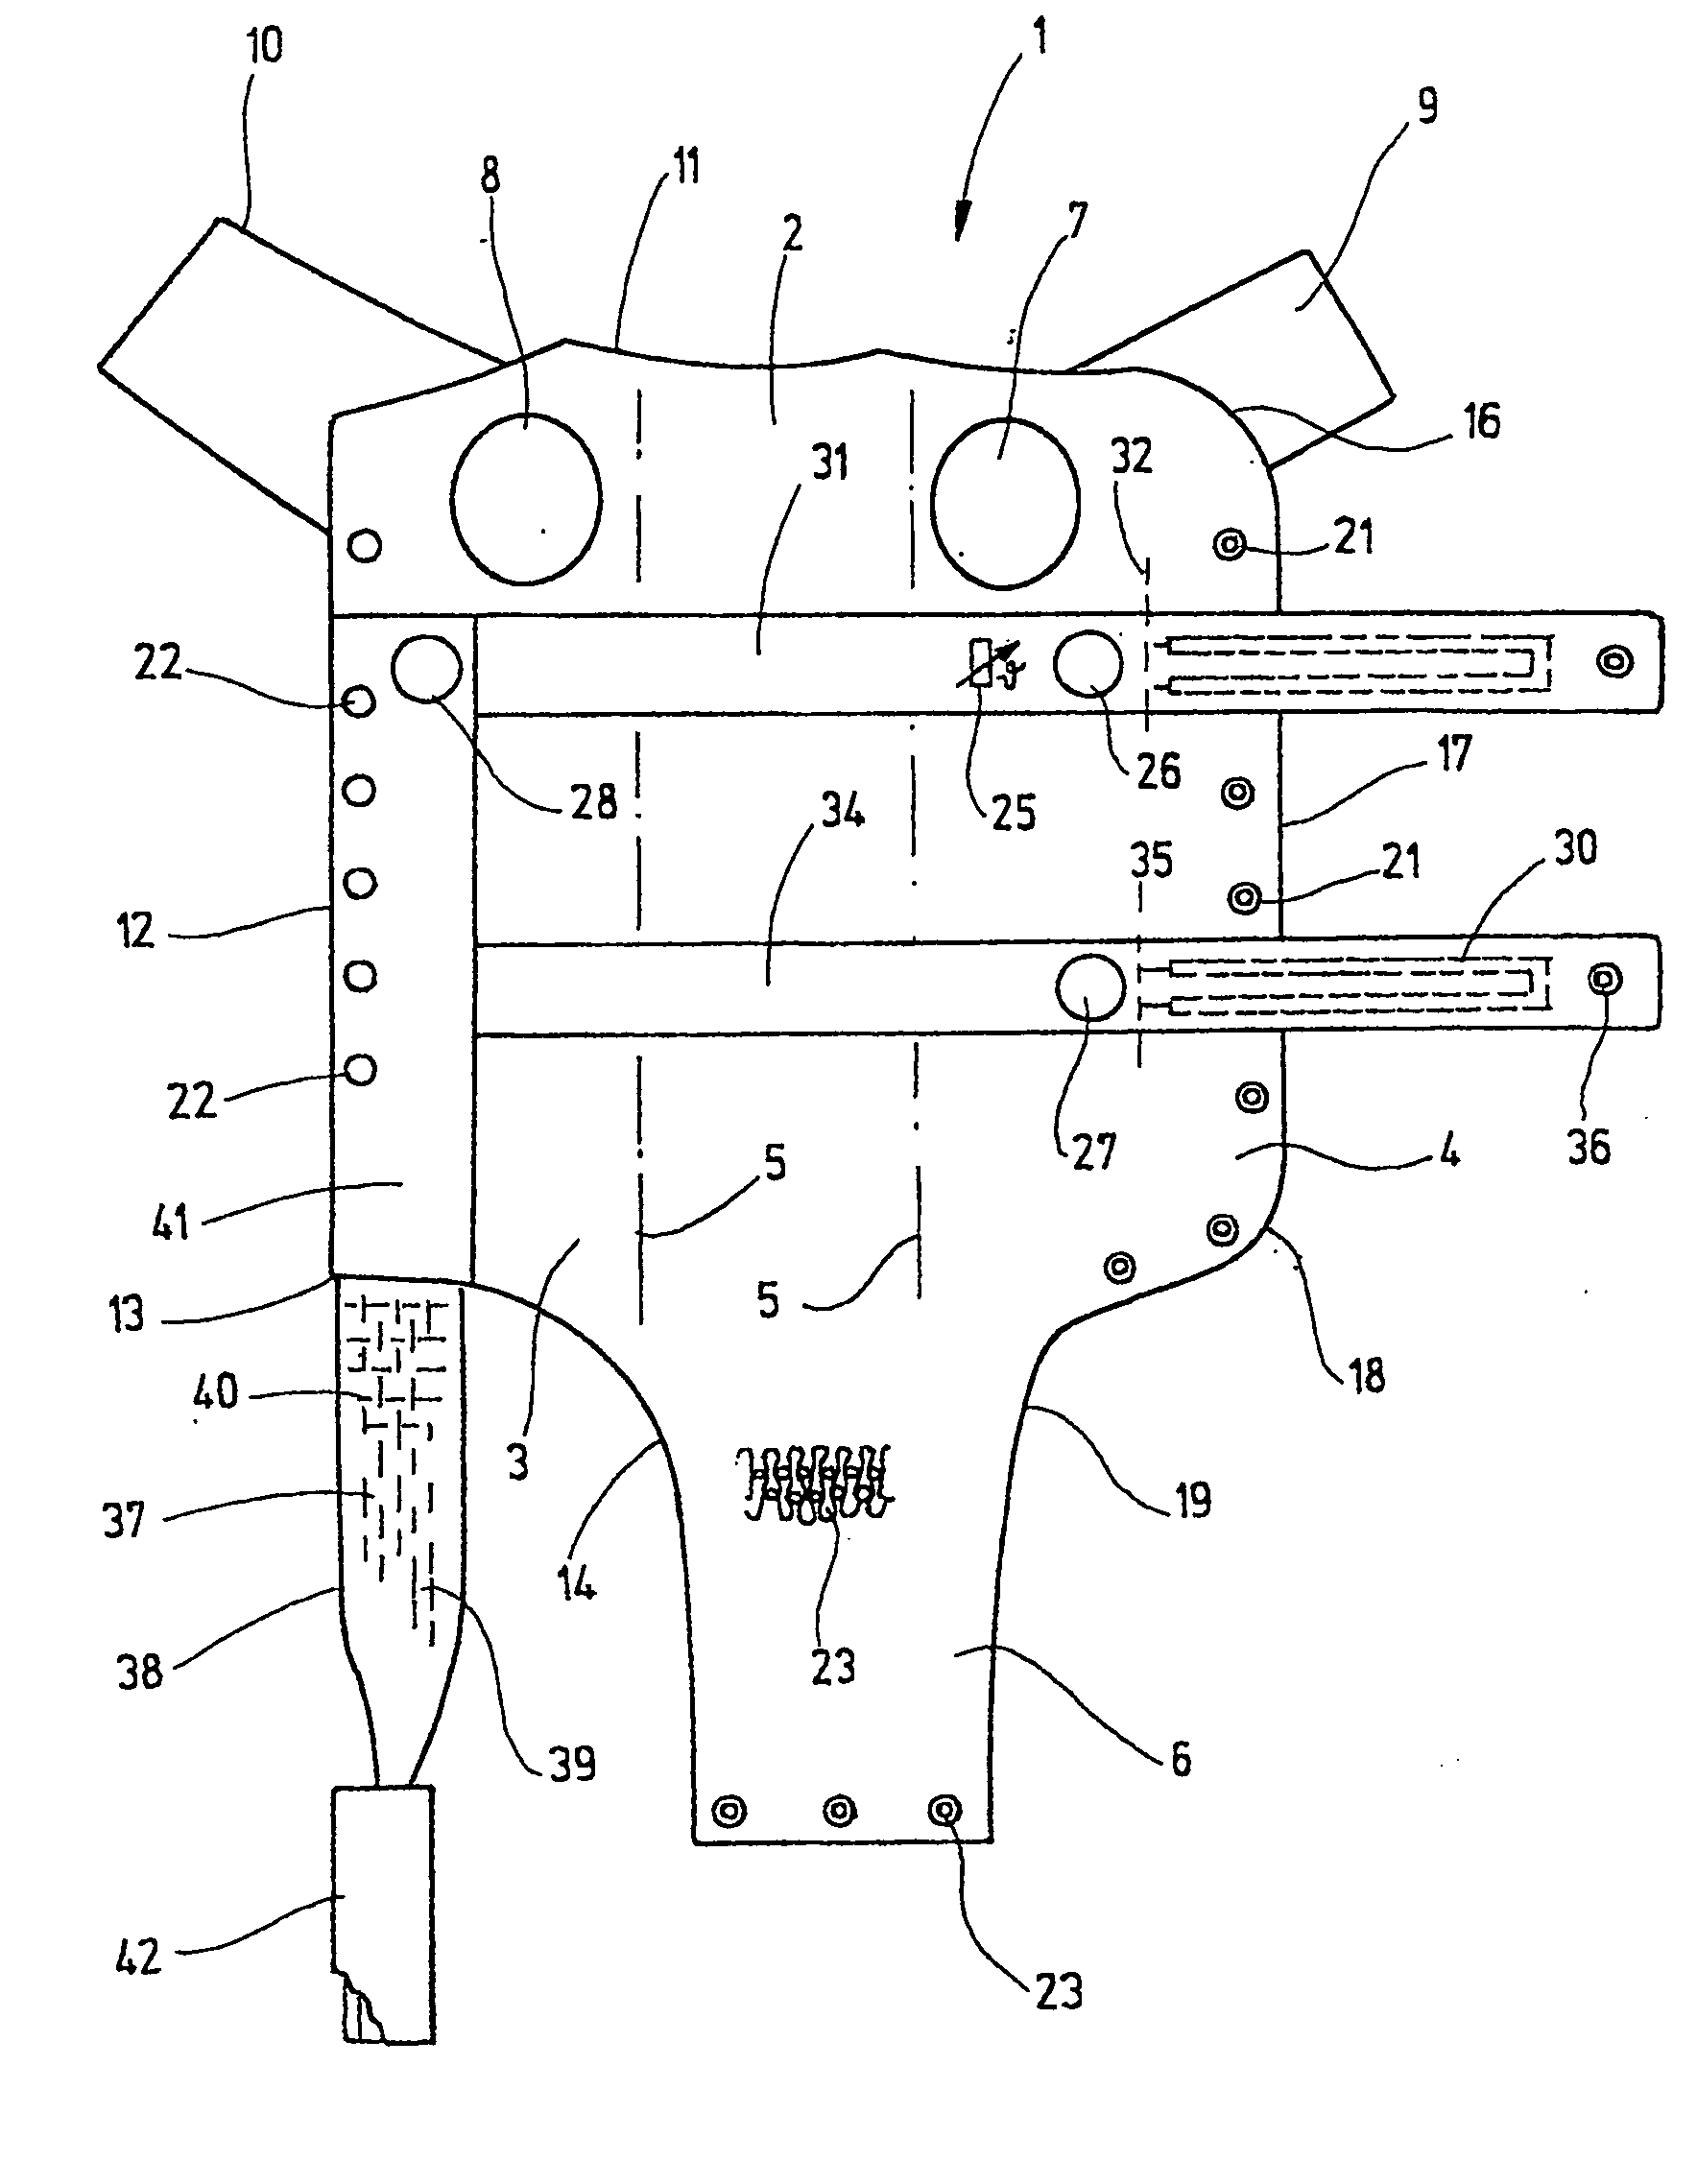 Garment With Integrated Sensor System